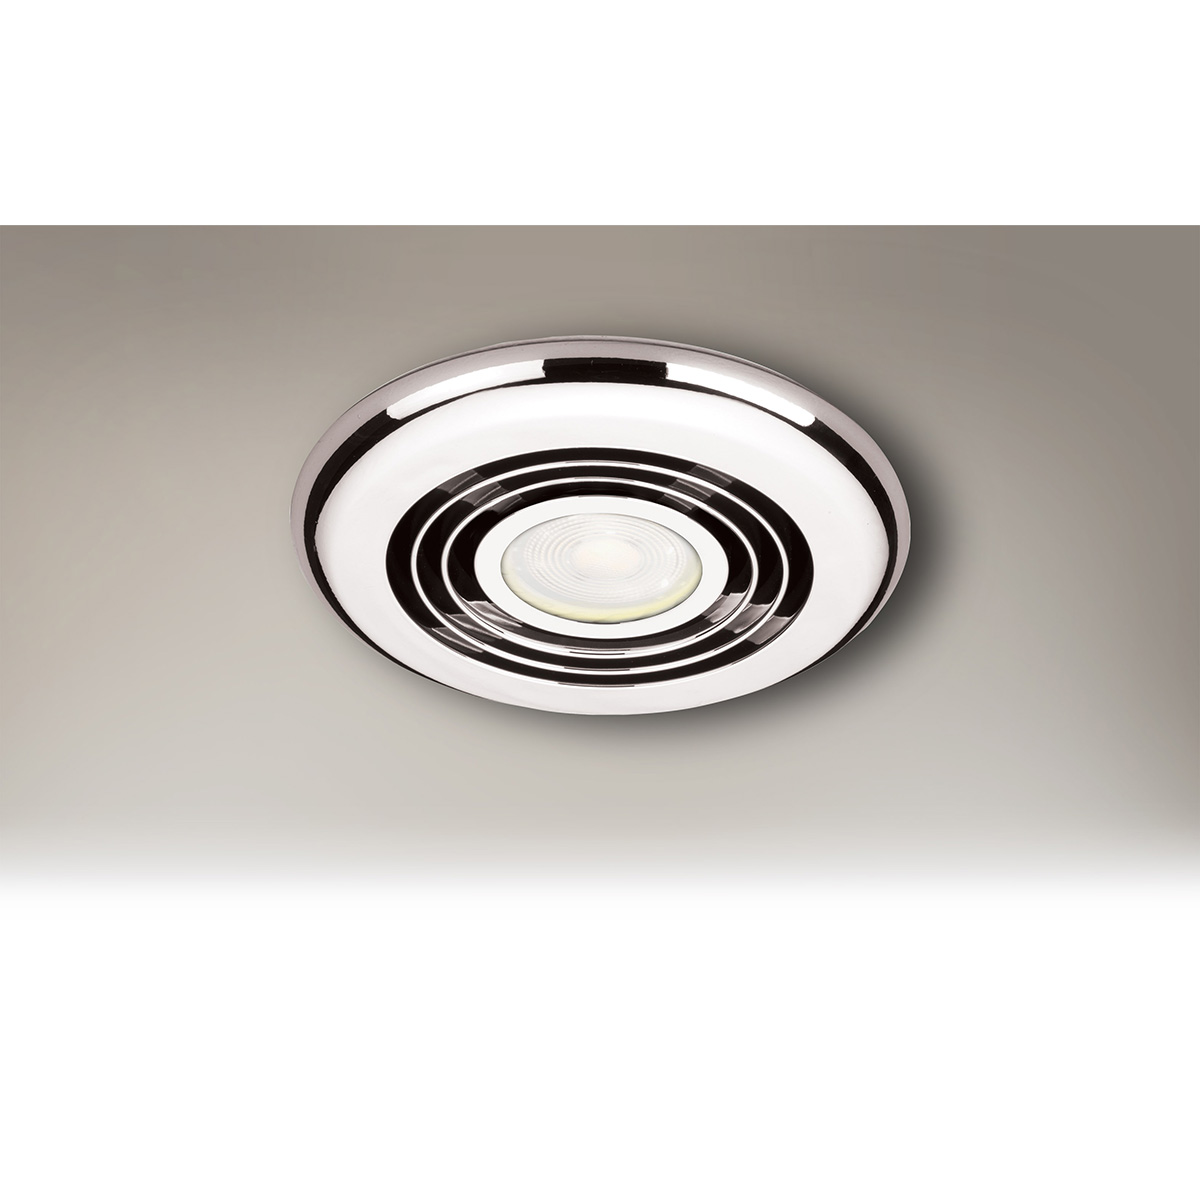 Surge Inline Fan in Chrome - Cool White LED